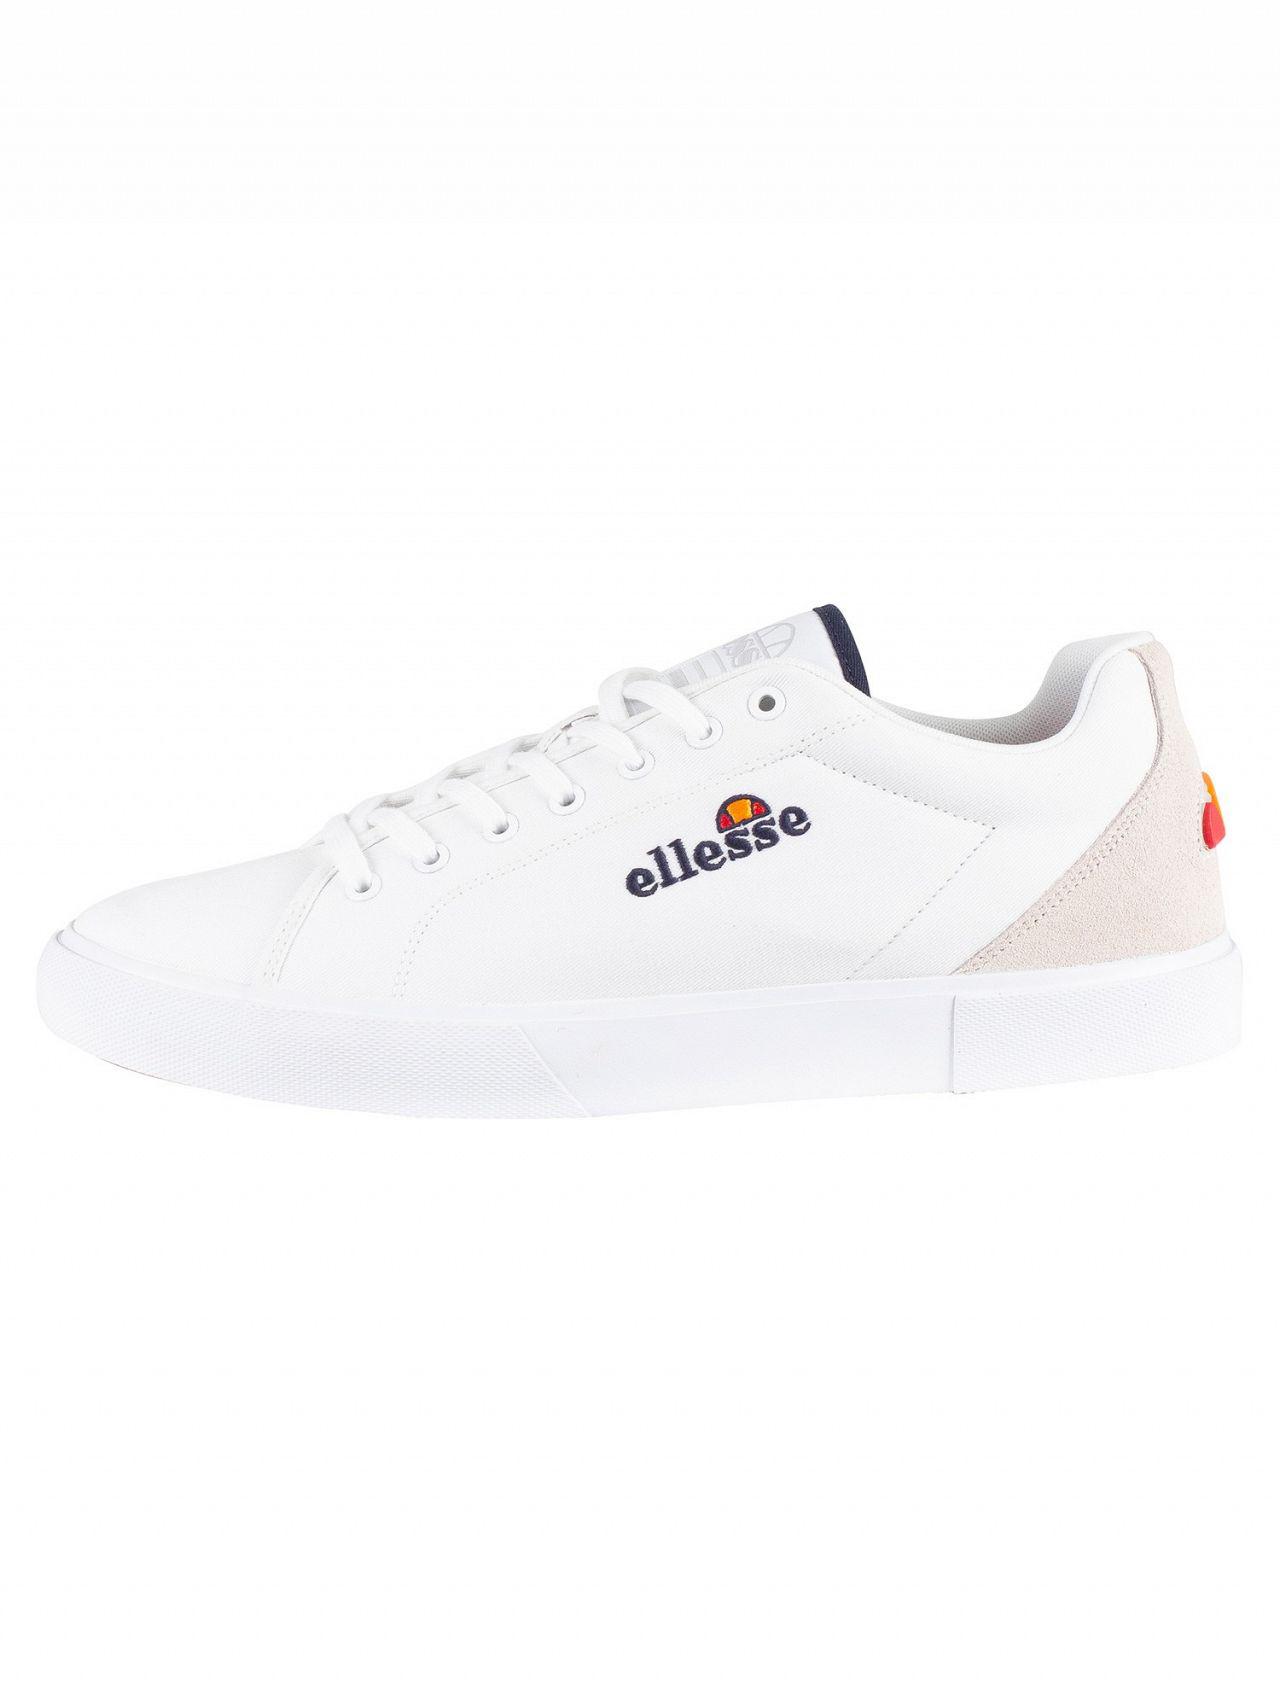 Ellesse White Taggia Canvas Trainers for Men - Lyst